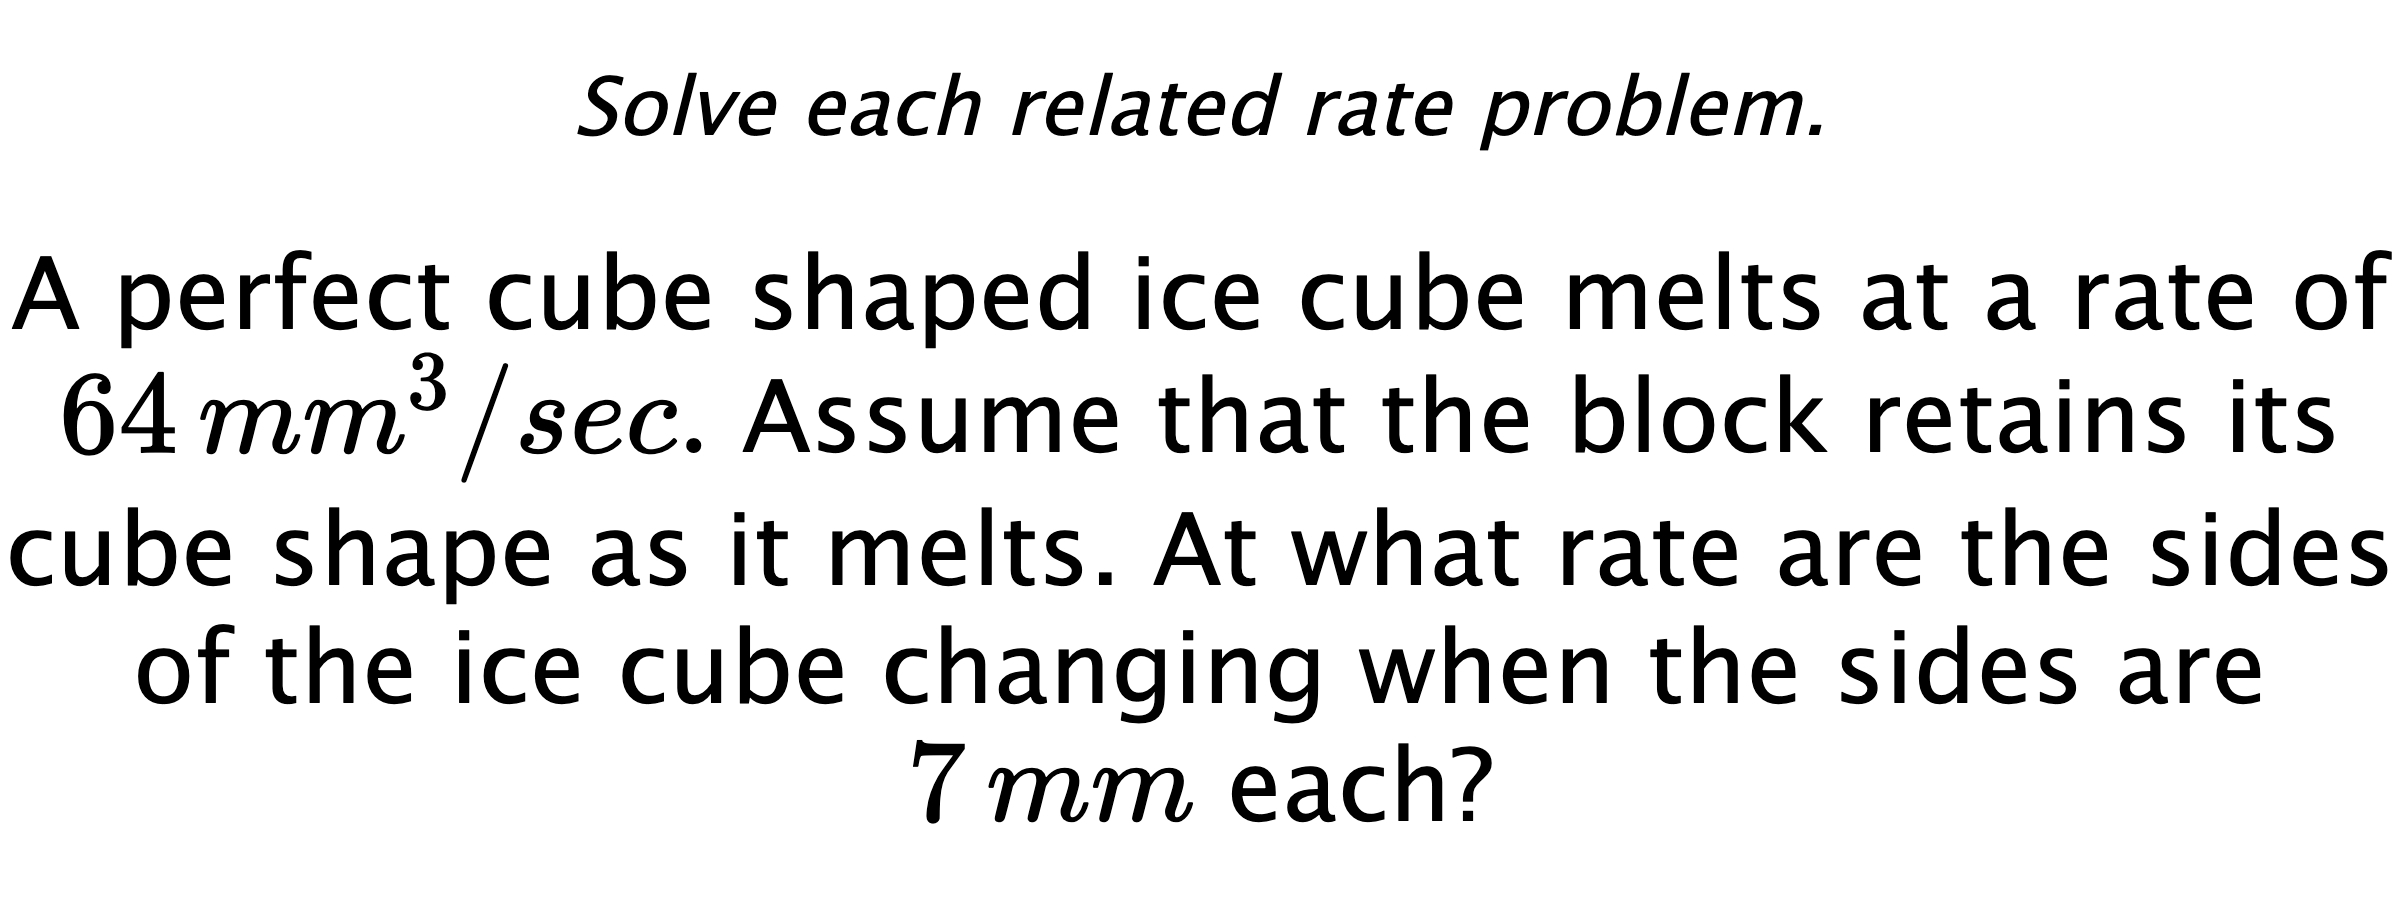 Solve each related rate problem. A perfect cube shaped ice cube melts at a rate of $64 \,mm^{3}/sec.$ Assume that the block retains its cube shape as it melts. At what rate are the sides of the ice cube changing when the sides are $7\,mm$ each?